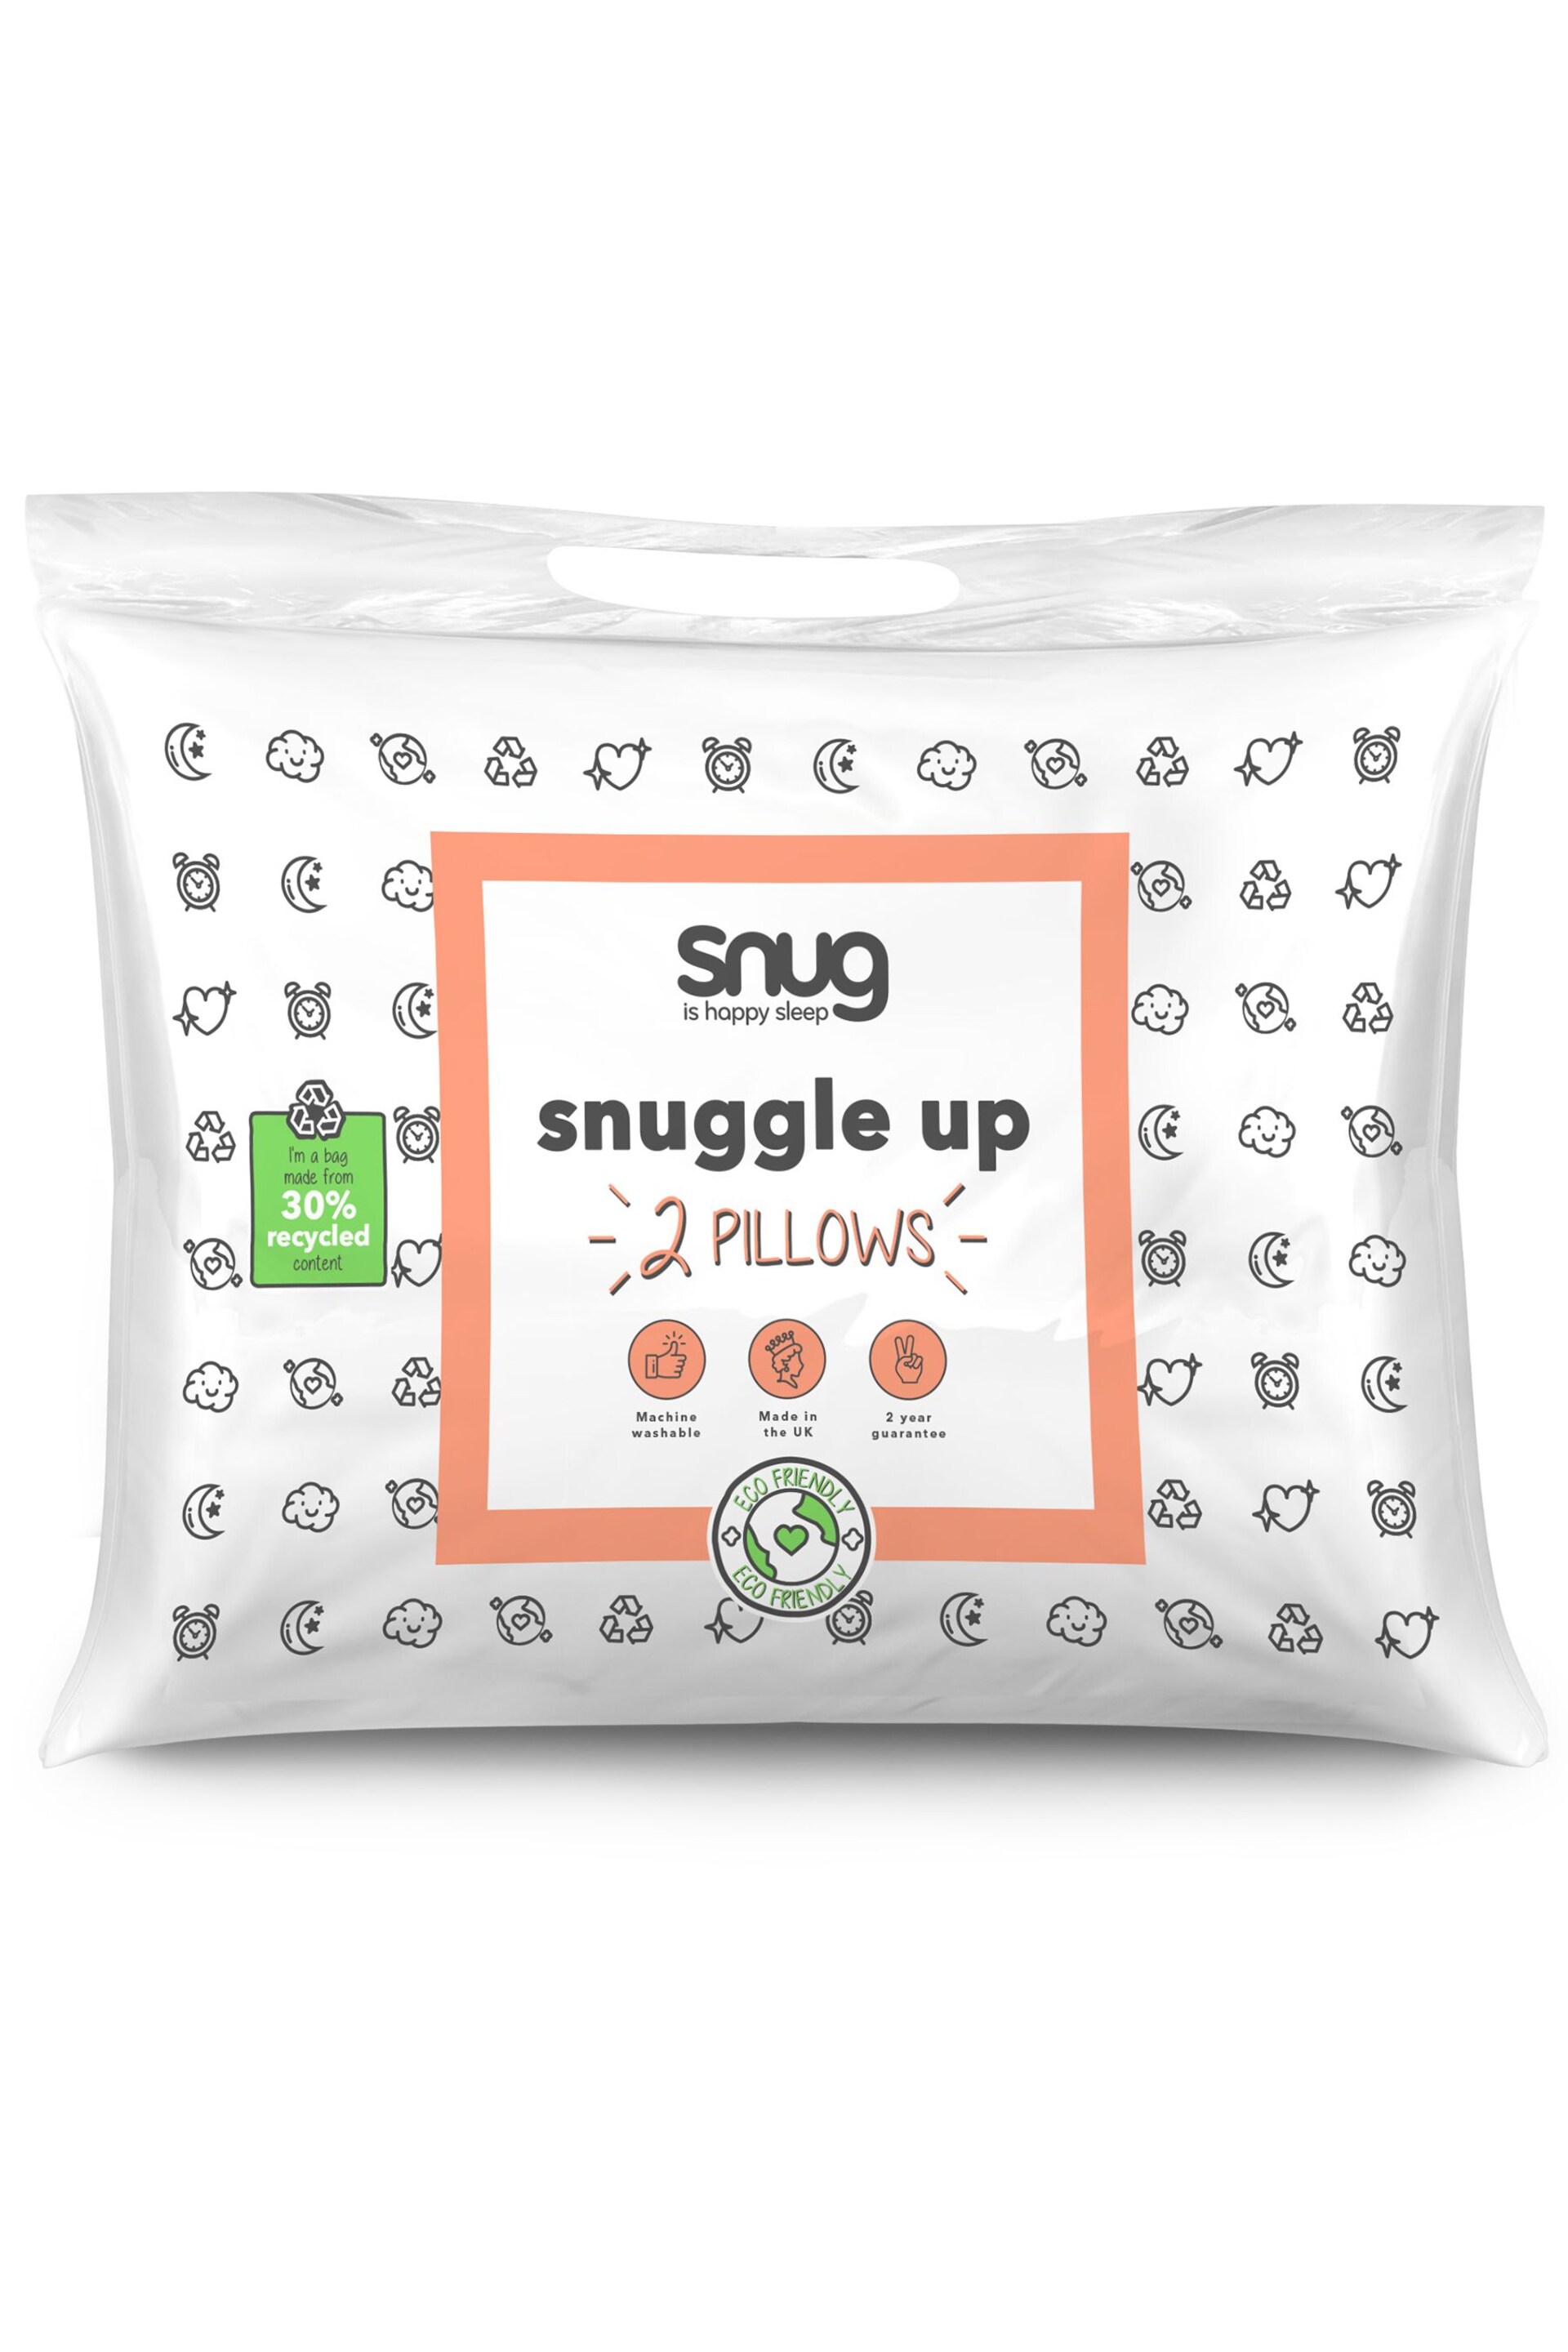 Snug Snuggle Up Pillows - 2 Pack - Image 6 of 10